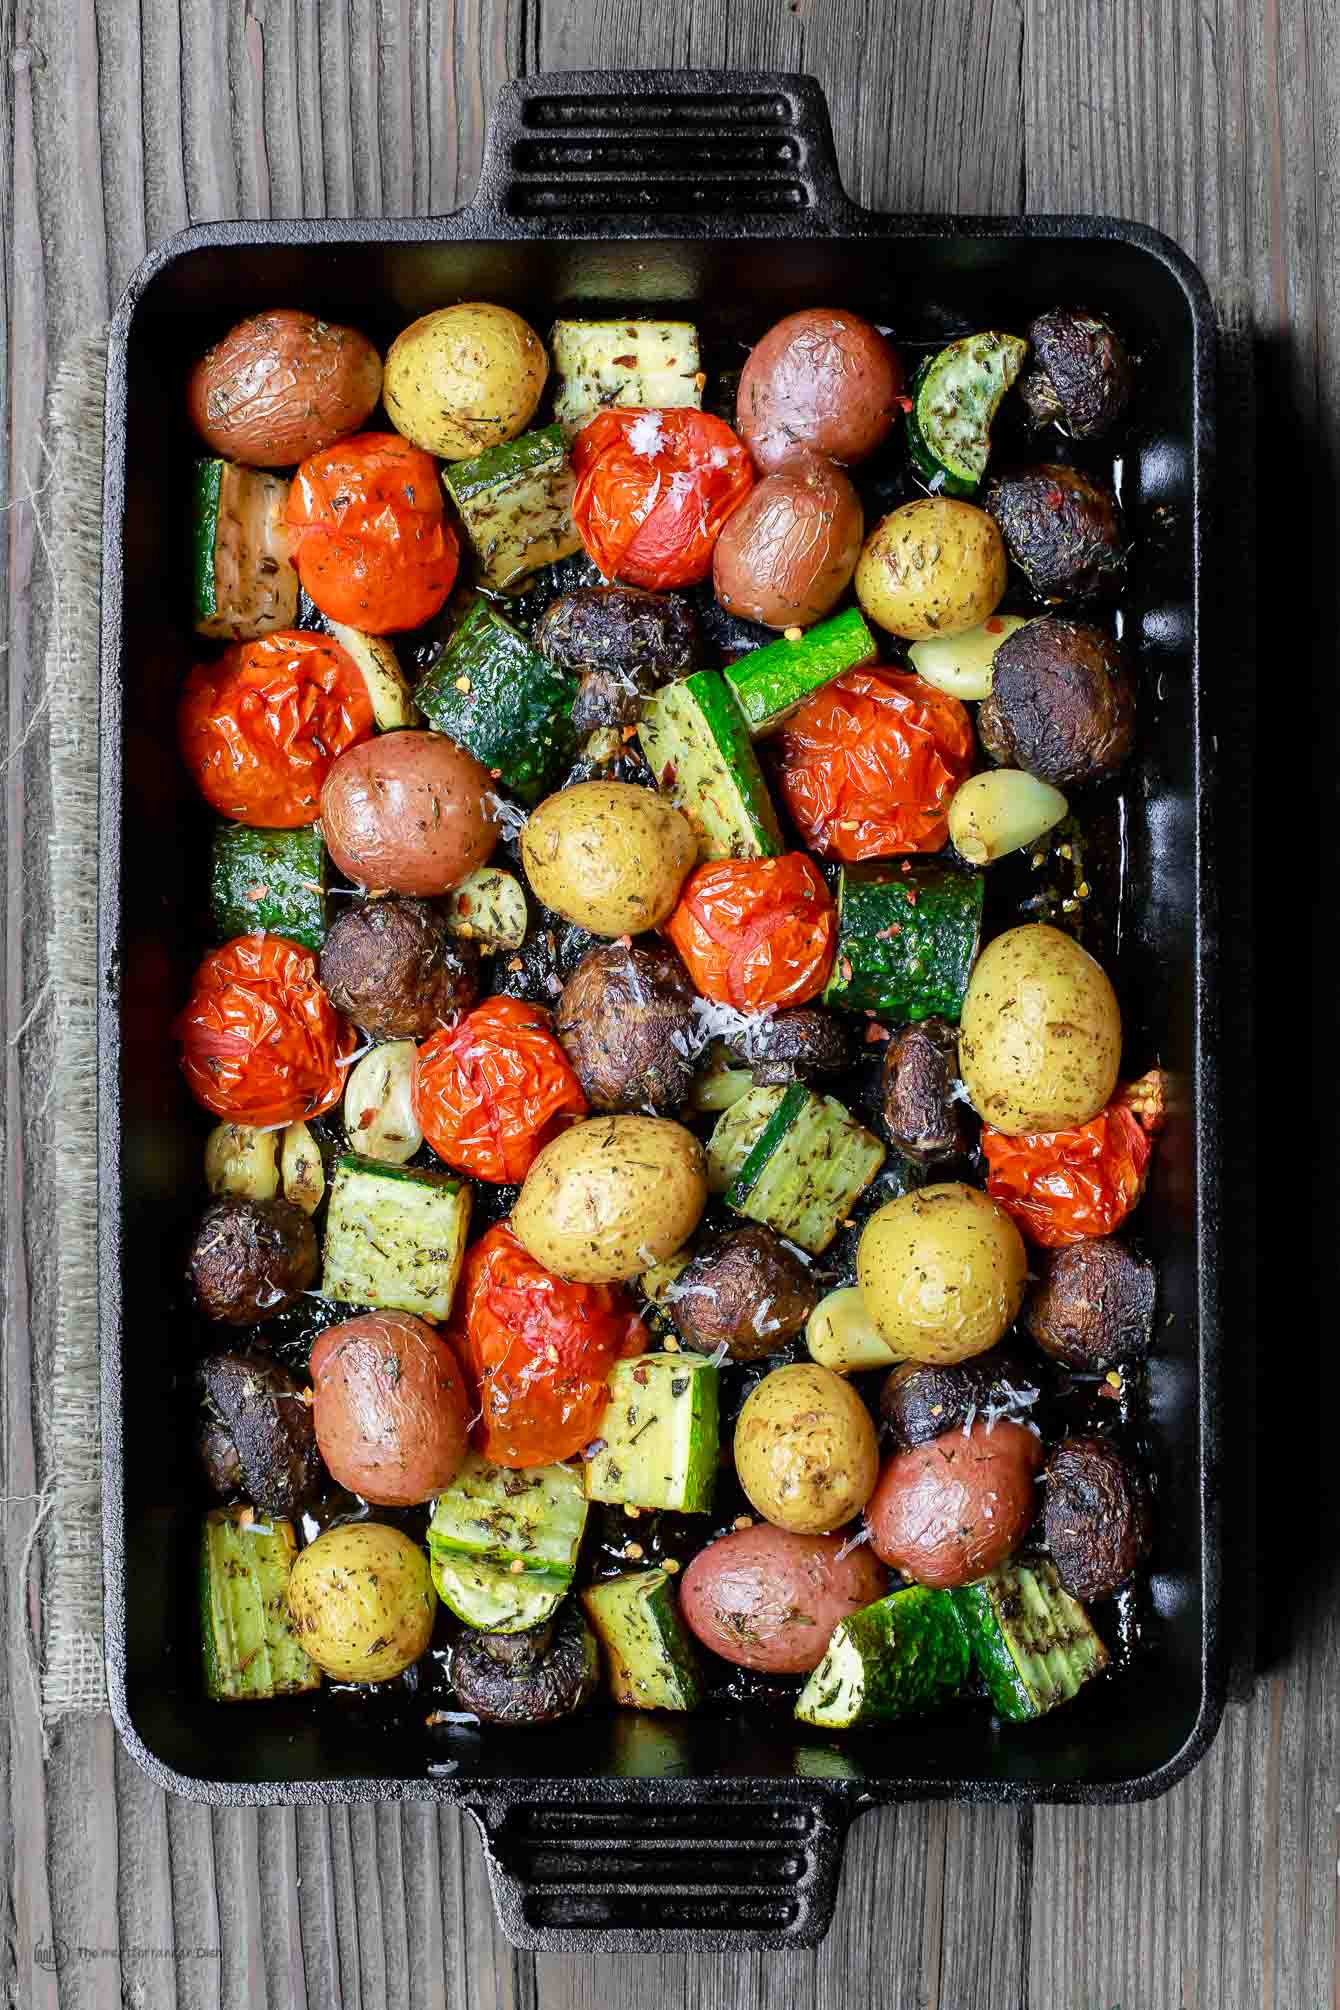 Roasted Vegetables In Oven
 BEST Italian Oven Roasted Ve ables